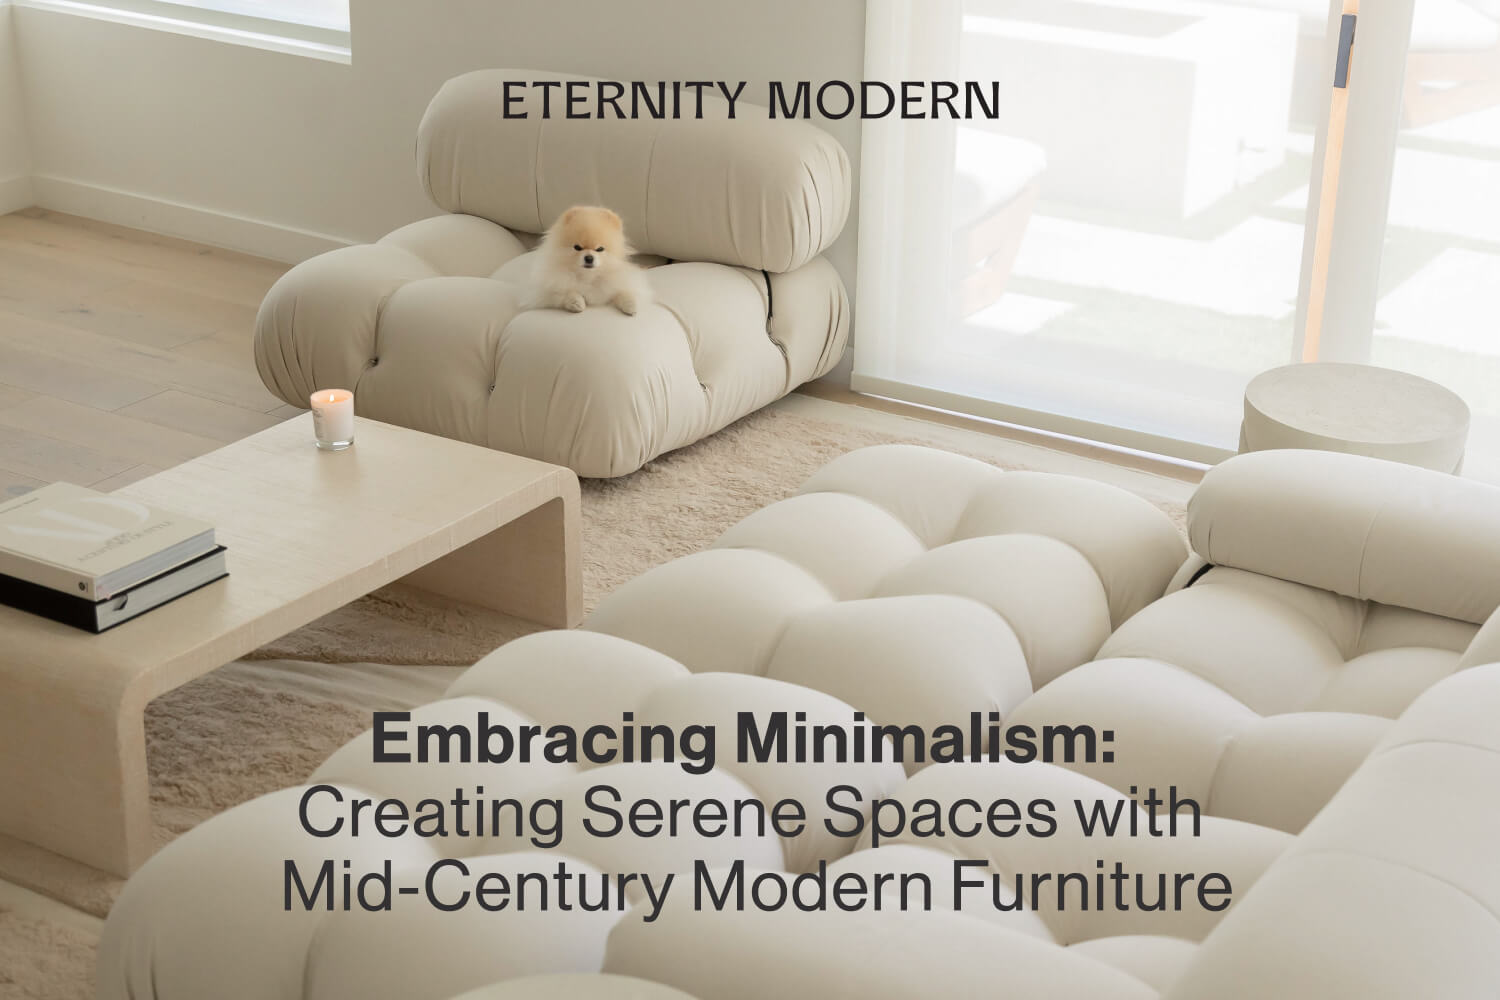 Embracing Minimalism: Creating Serene Spaces with Mid-Century Modern Furniture